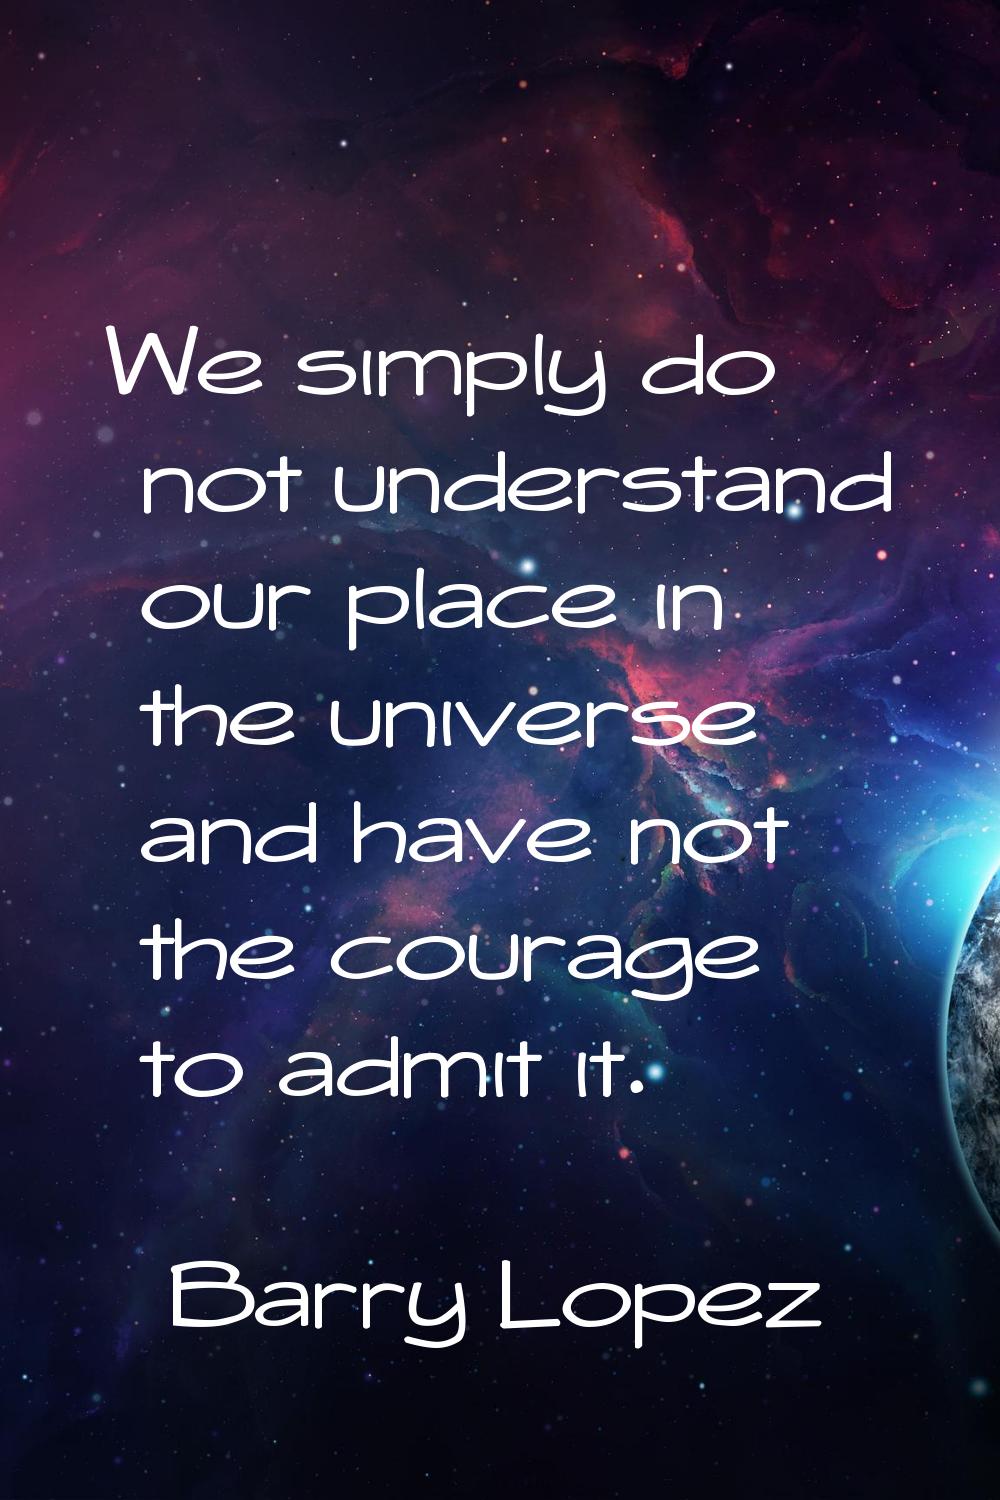 We simply do not understand our place in the universe and have not the courage to admit it.